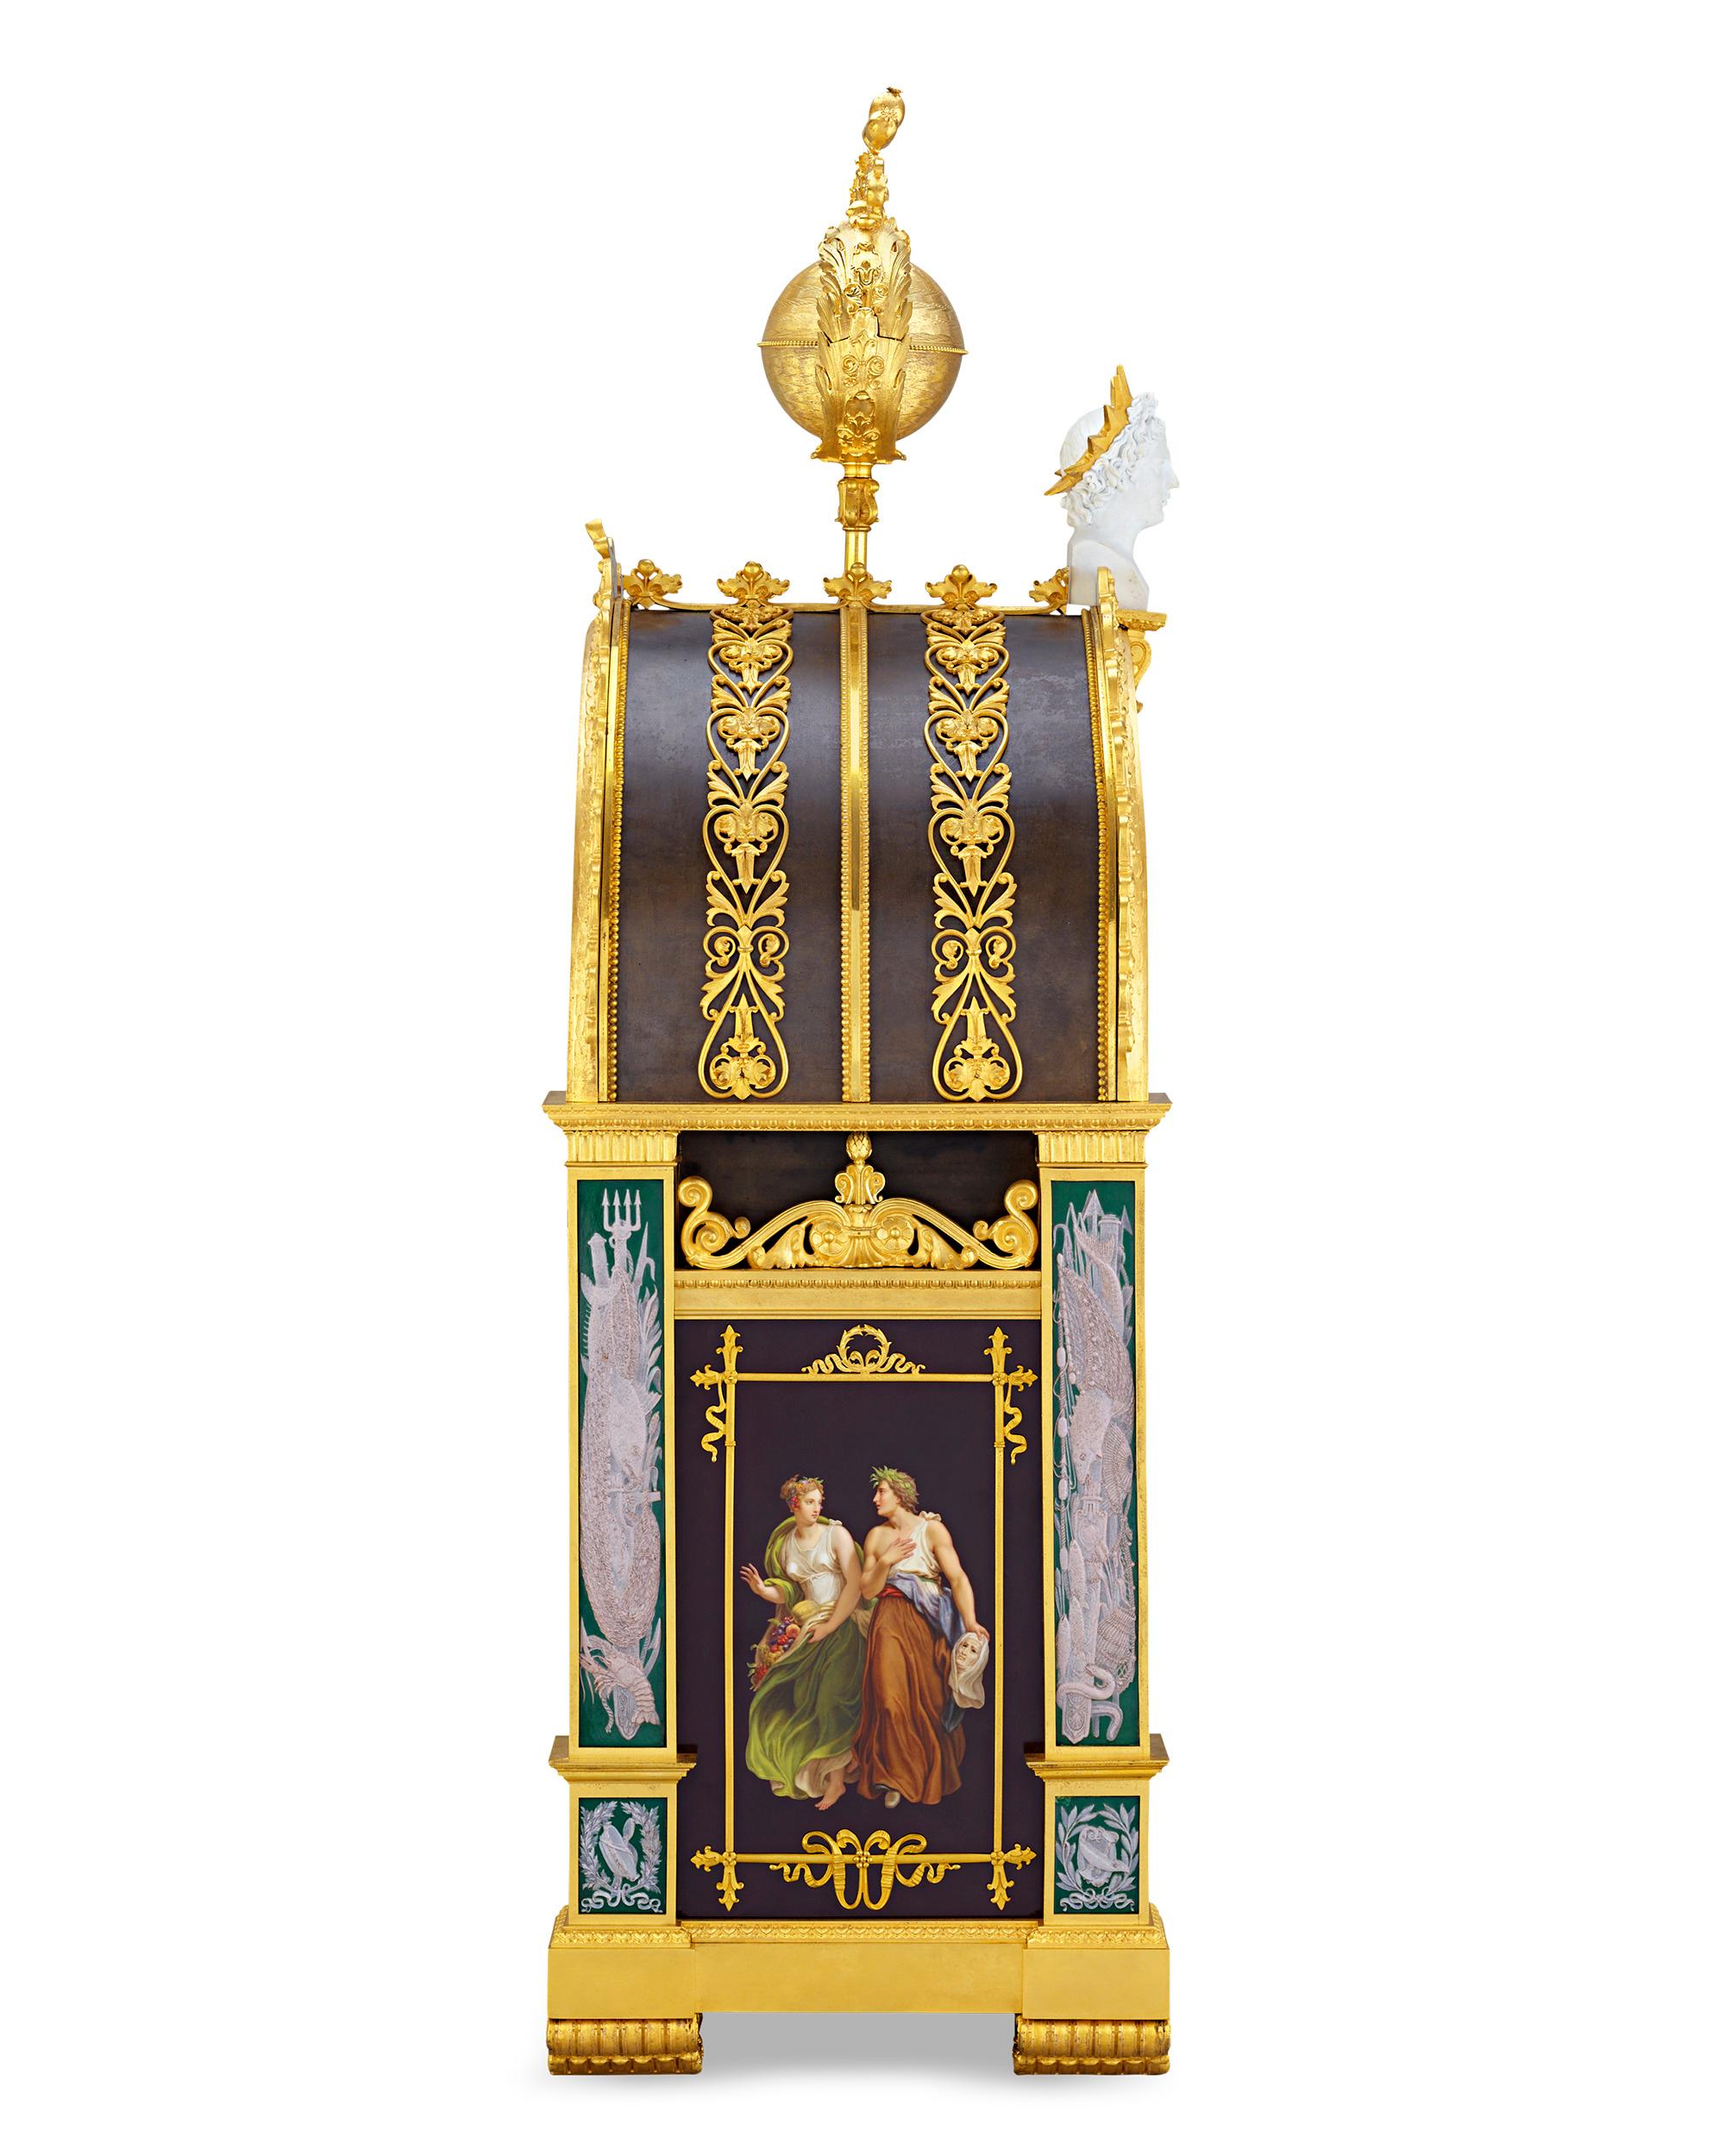 Bronze King Louis Philippe i of France's Large Mantel Clock with Sèvres Porcelain